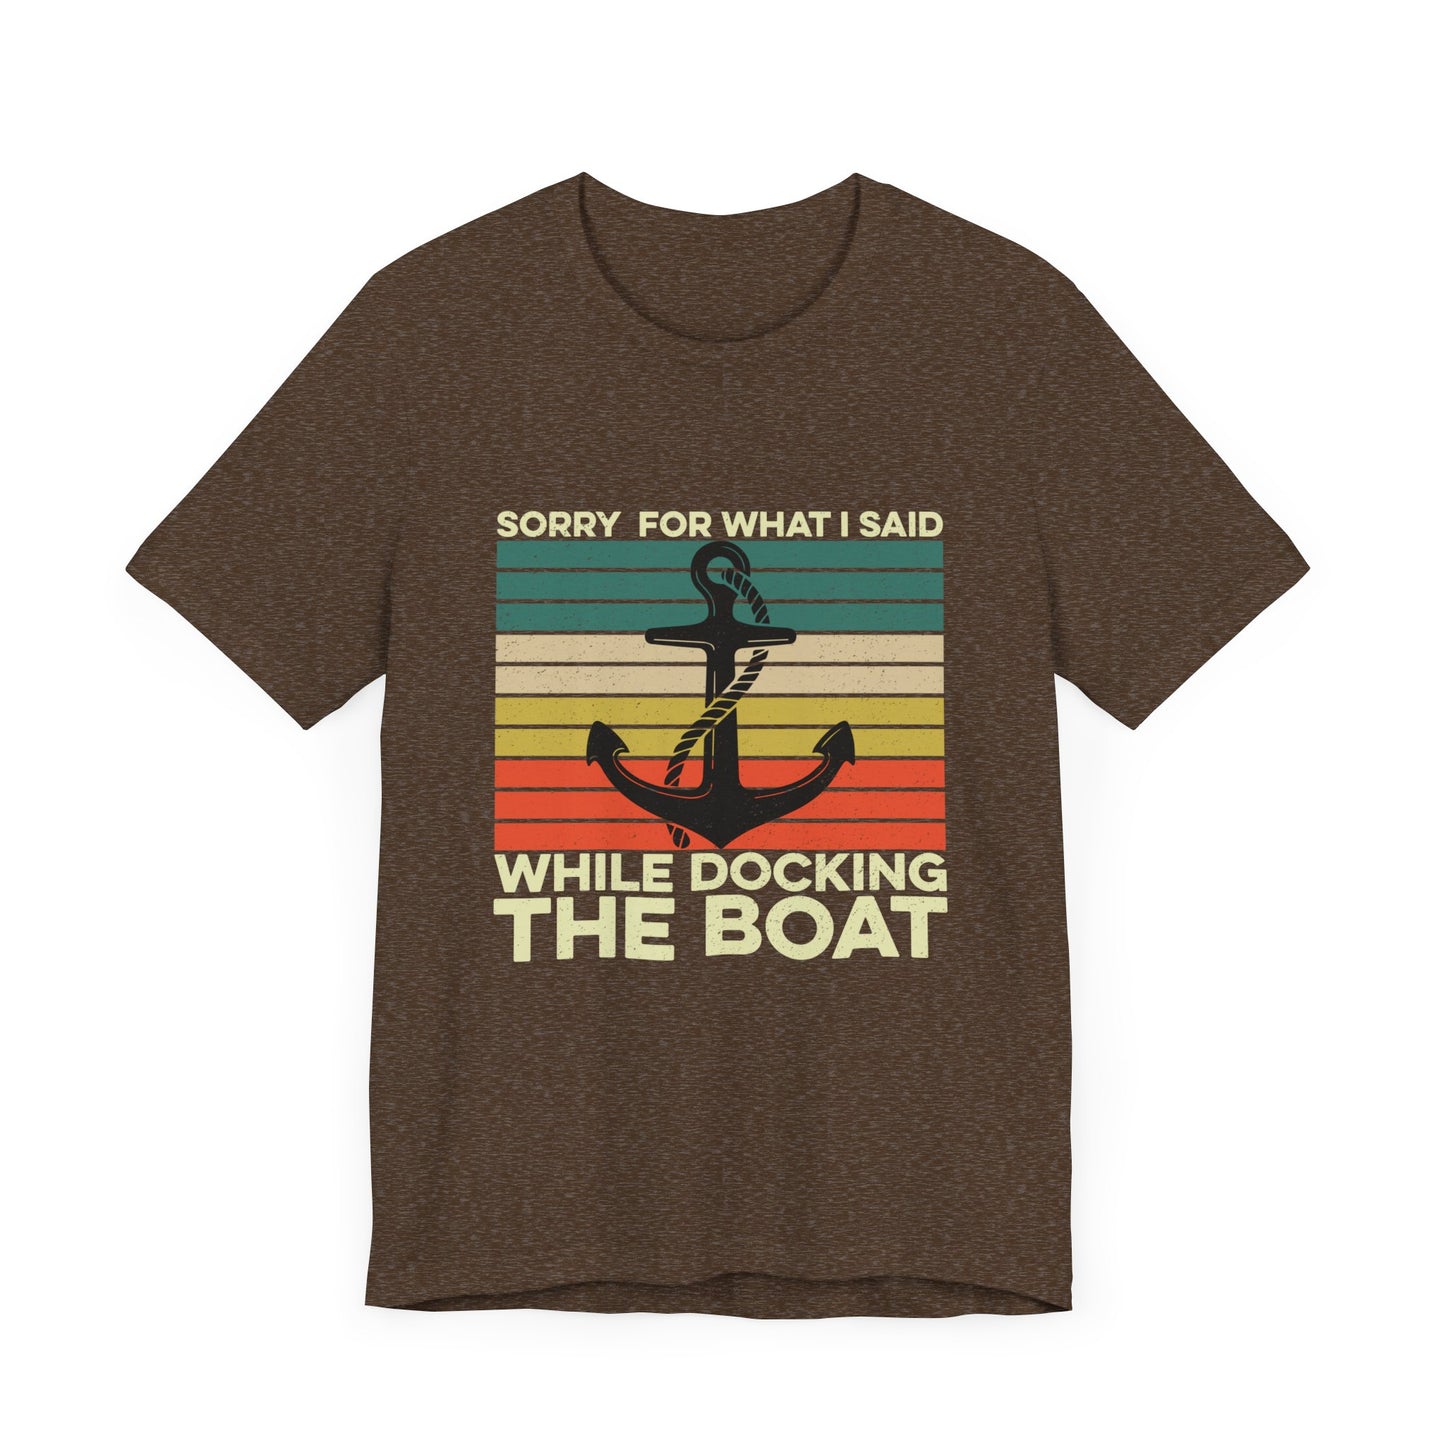 Sorry for What I Said While Docking the Boat Funny Short Sleeve Tee